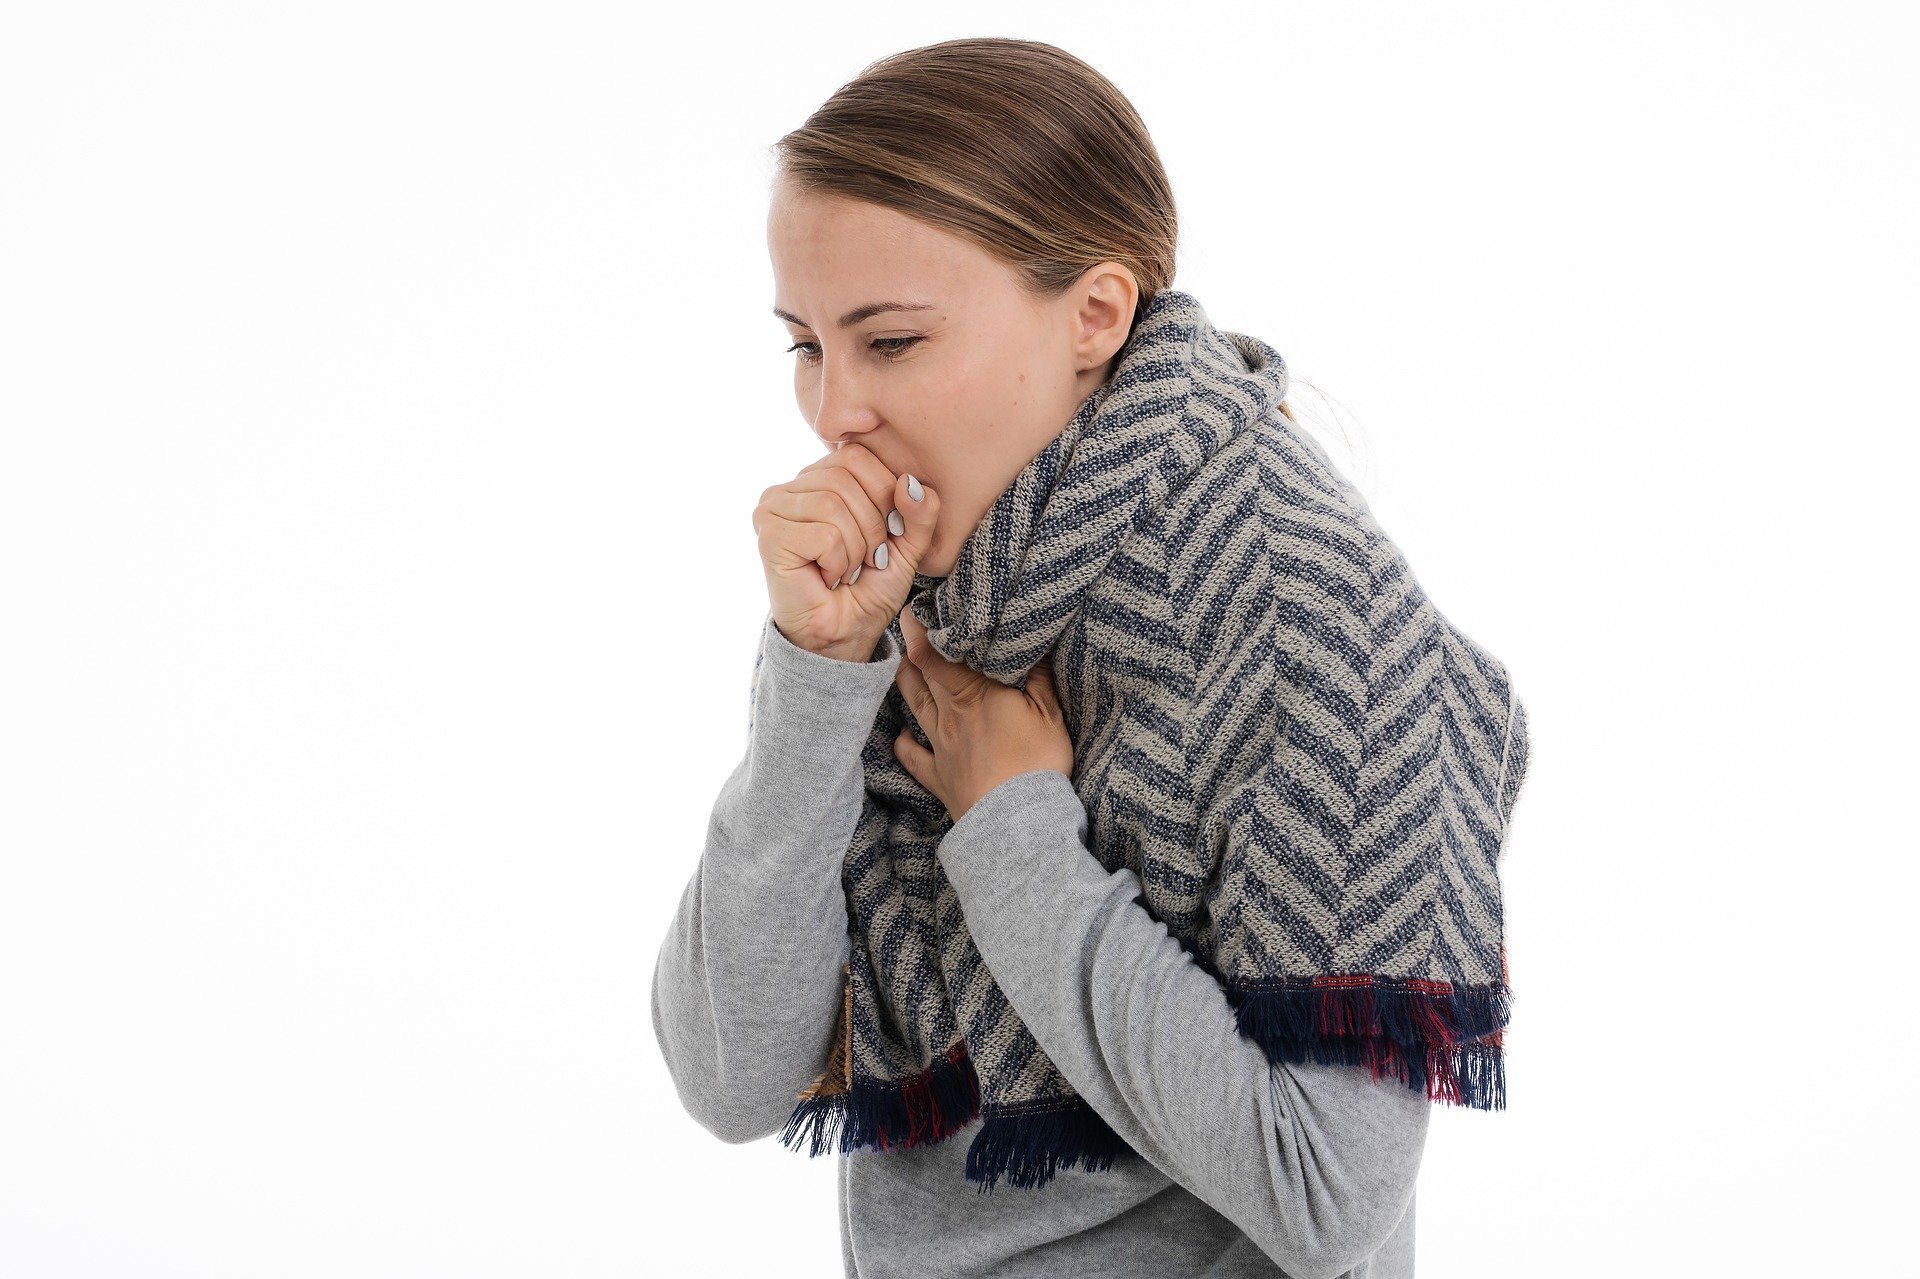 If your cough is persistent - make sure you check it out